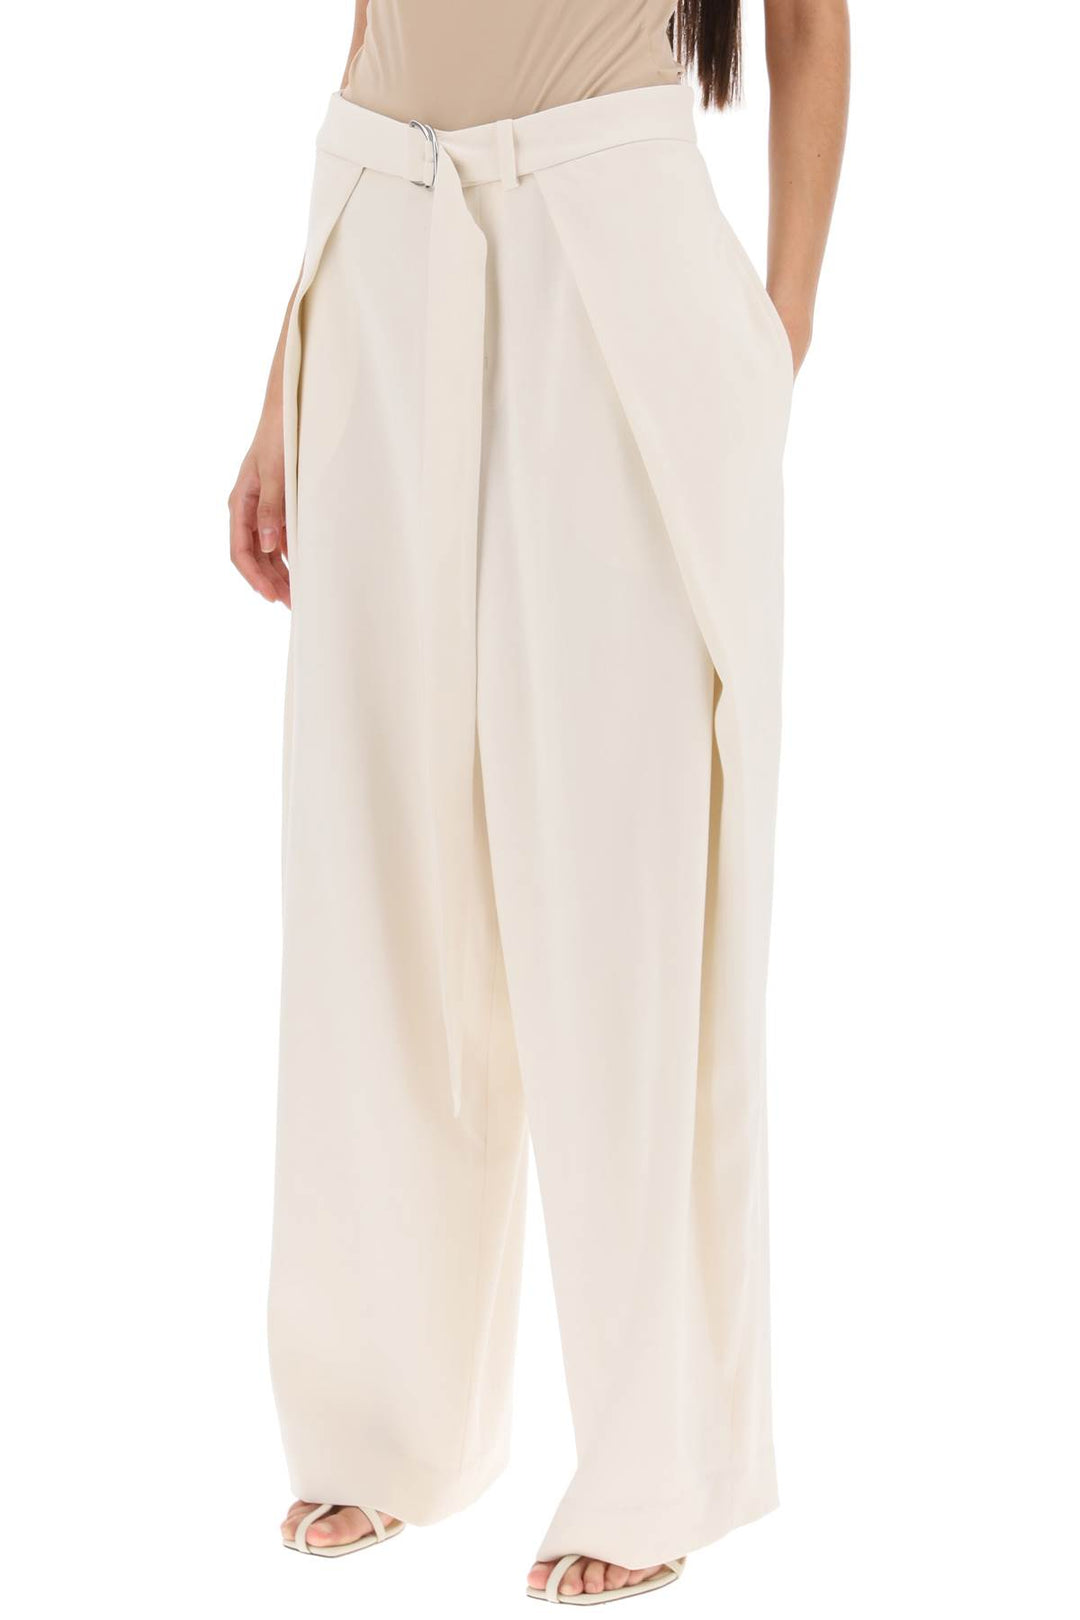 Ami Alexandre Matiussi Wide Fit Pants With Floating Panels   Bianco